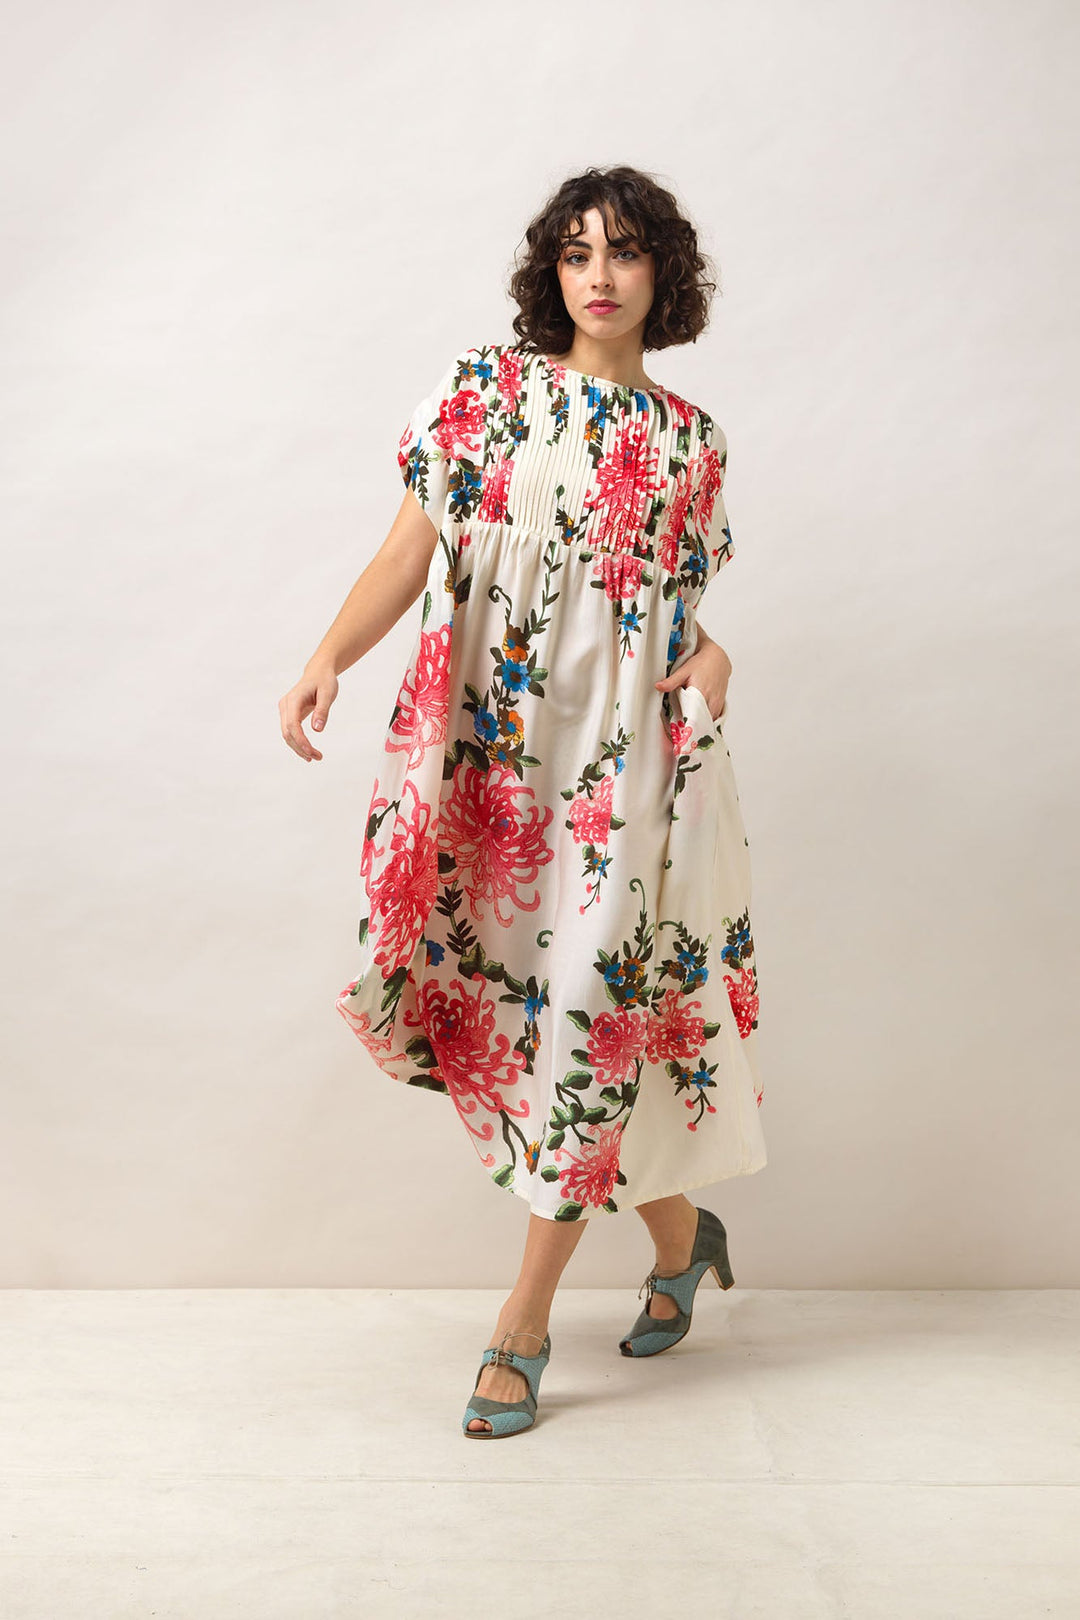 Women's short sleeve pleated dress in ecru with chrysanthemum print by One Hundred Stars